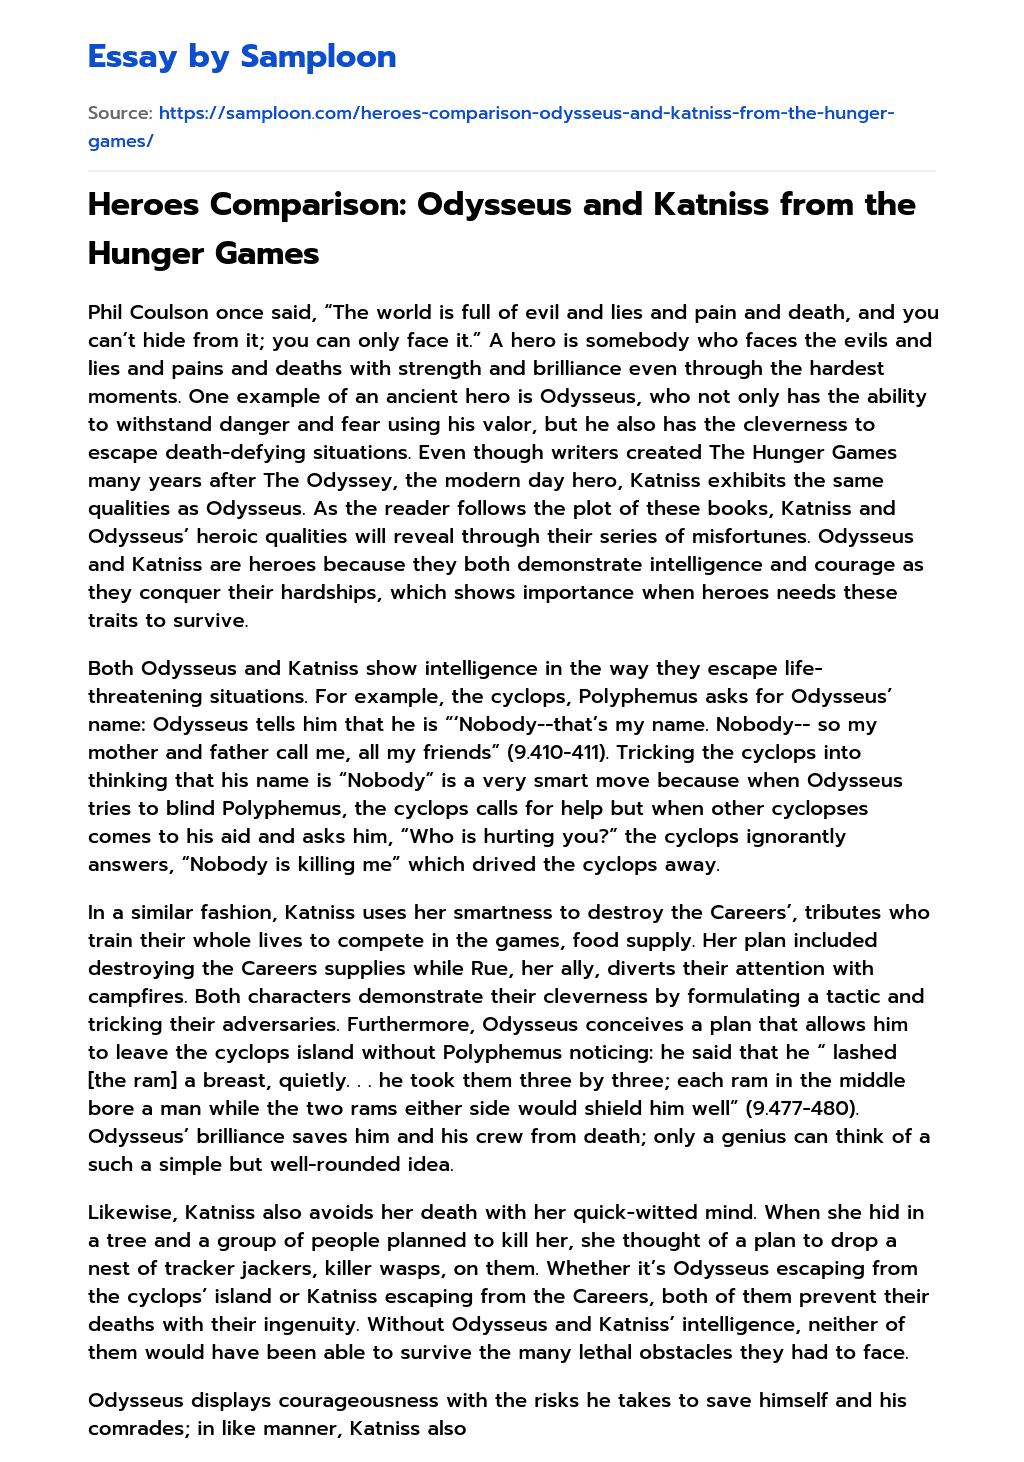 Heroes Comparison: Odysseus and Katniss from the Hunger Games essay